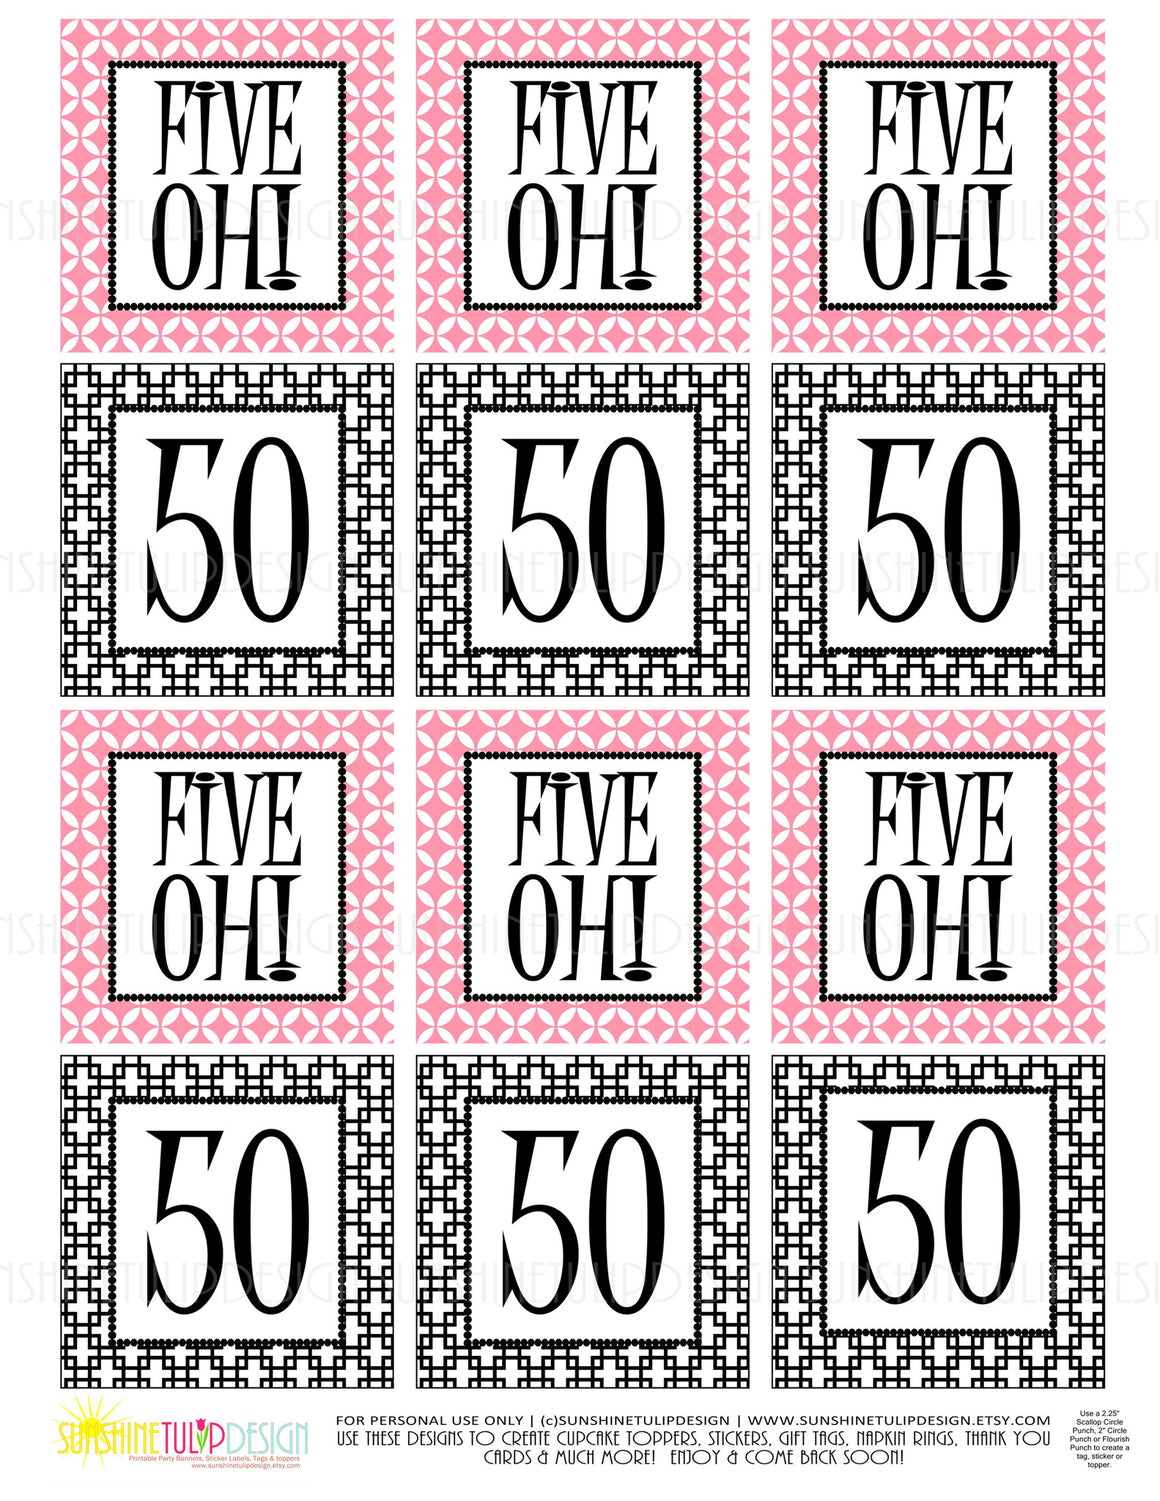 Printable 50th Birthday Five Oh! Pink & Black Cupcake Toppers, Sticker Labels & Party Favor Tags - Sunshinetulipdesign